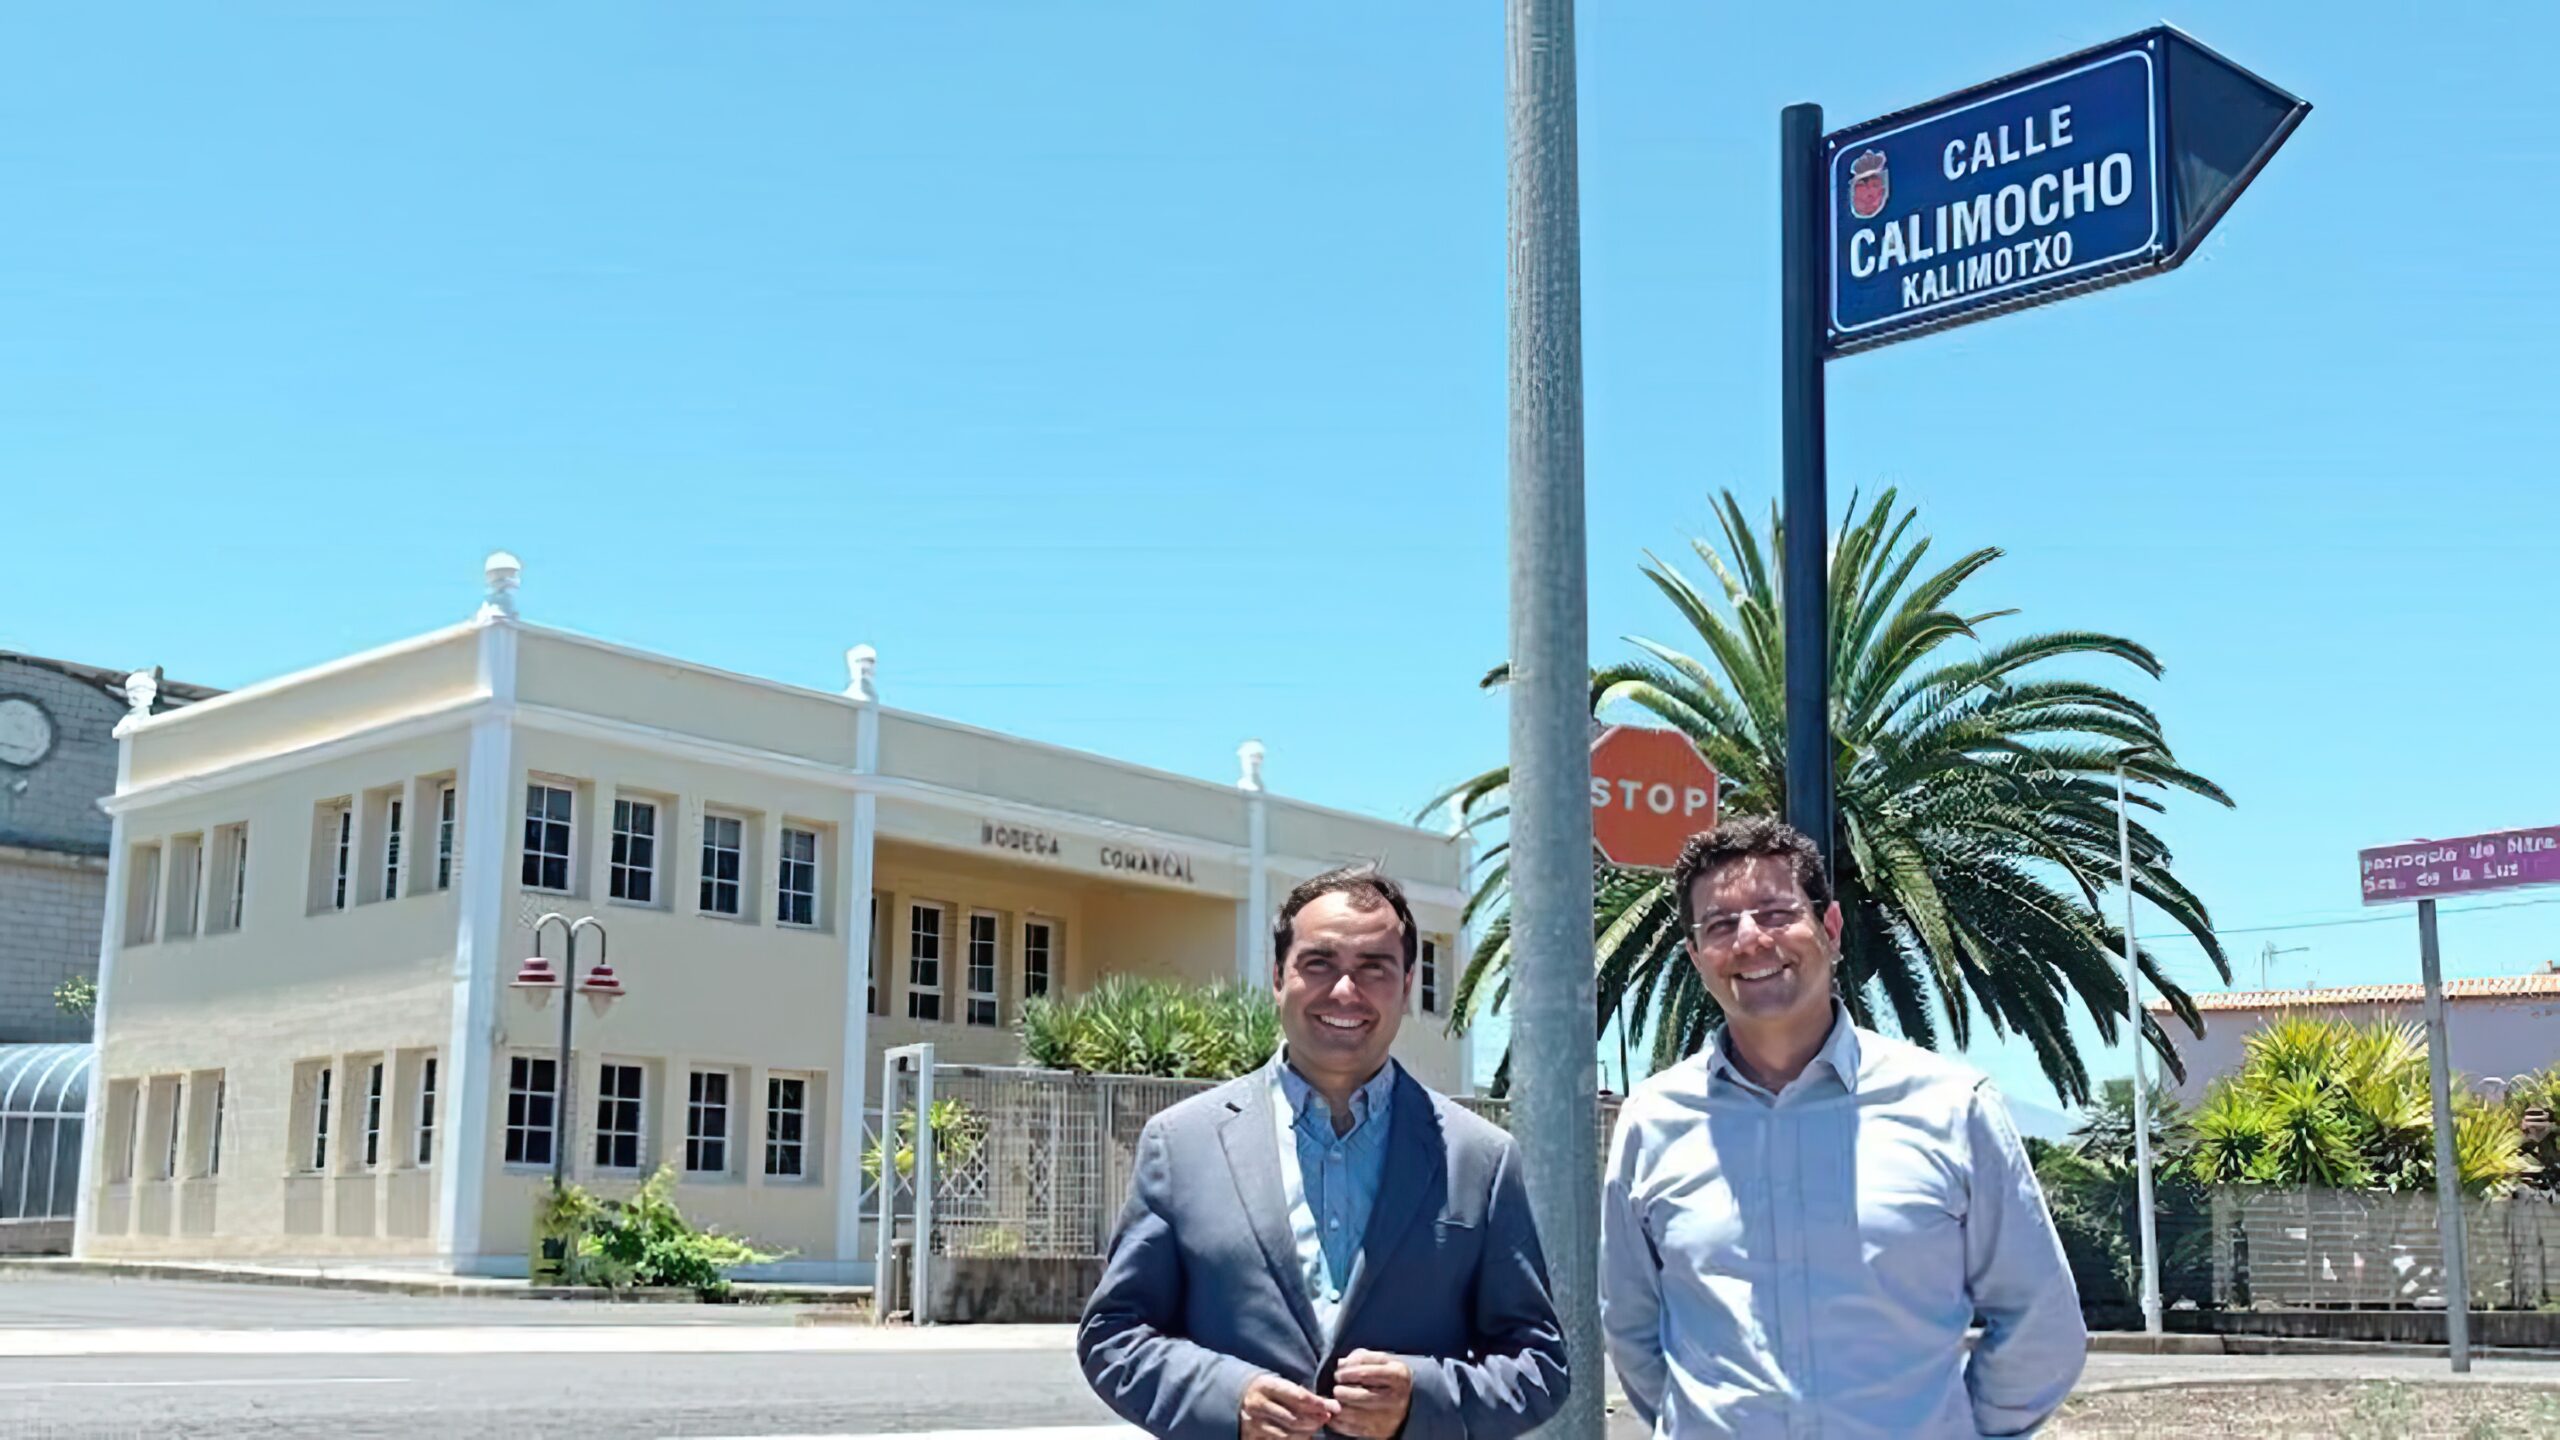 Calimocho now has a street in Spain (and this is its curious history)